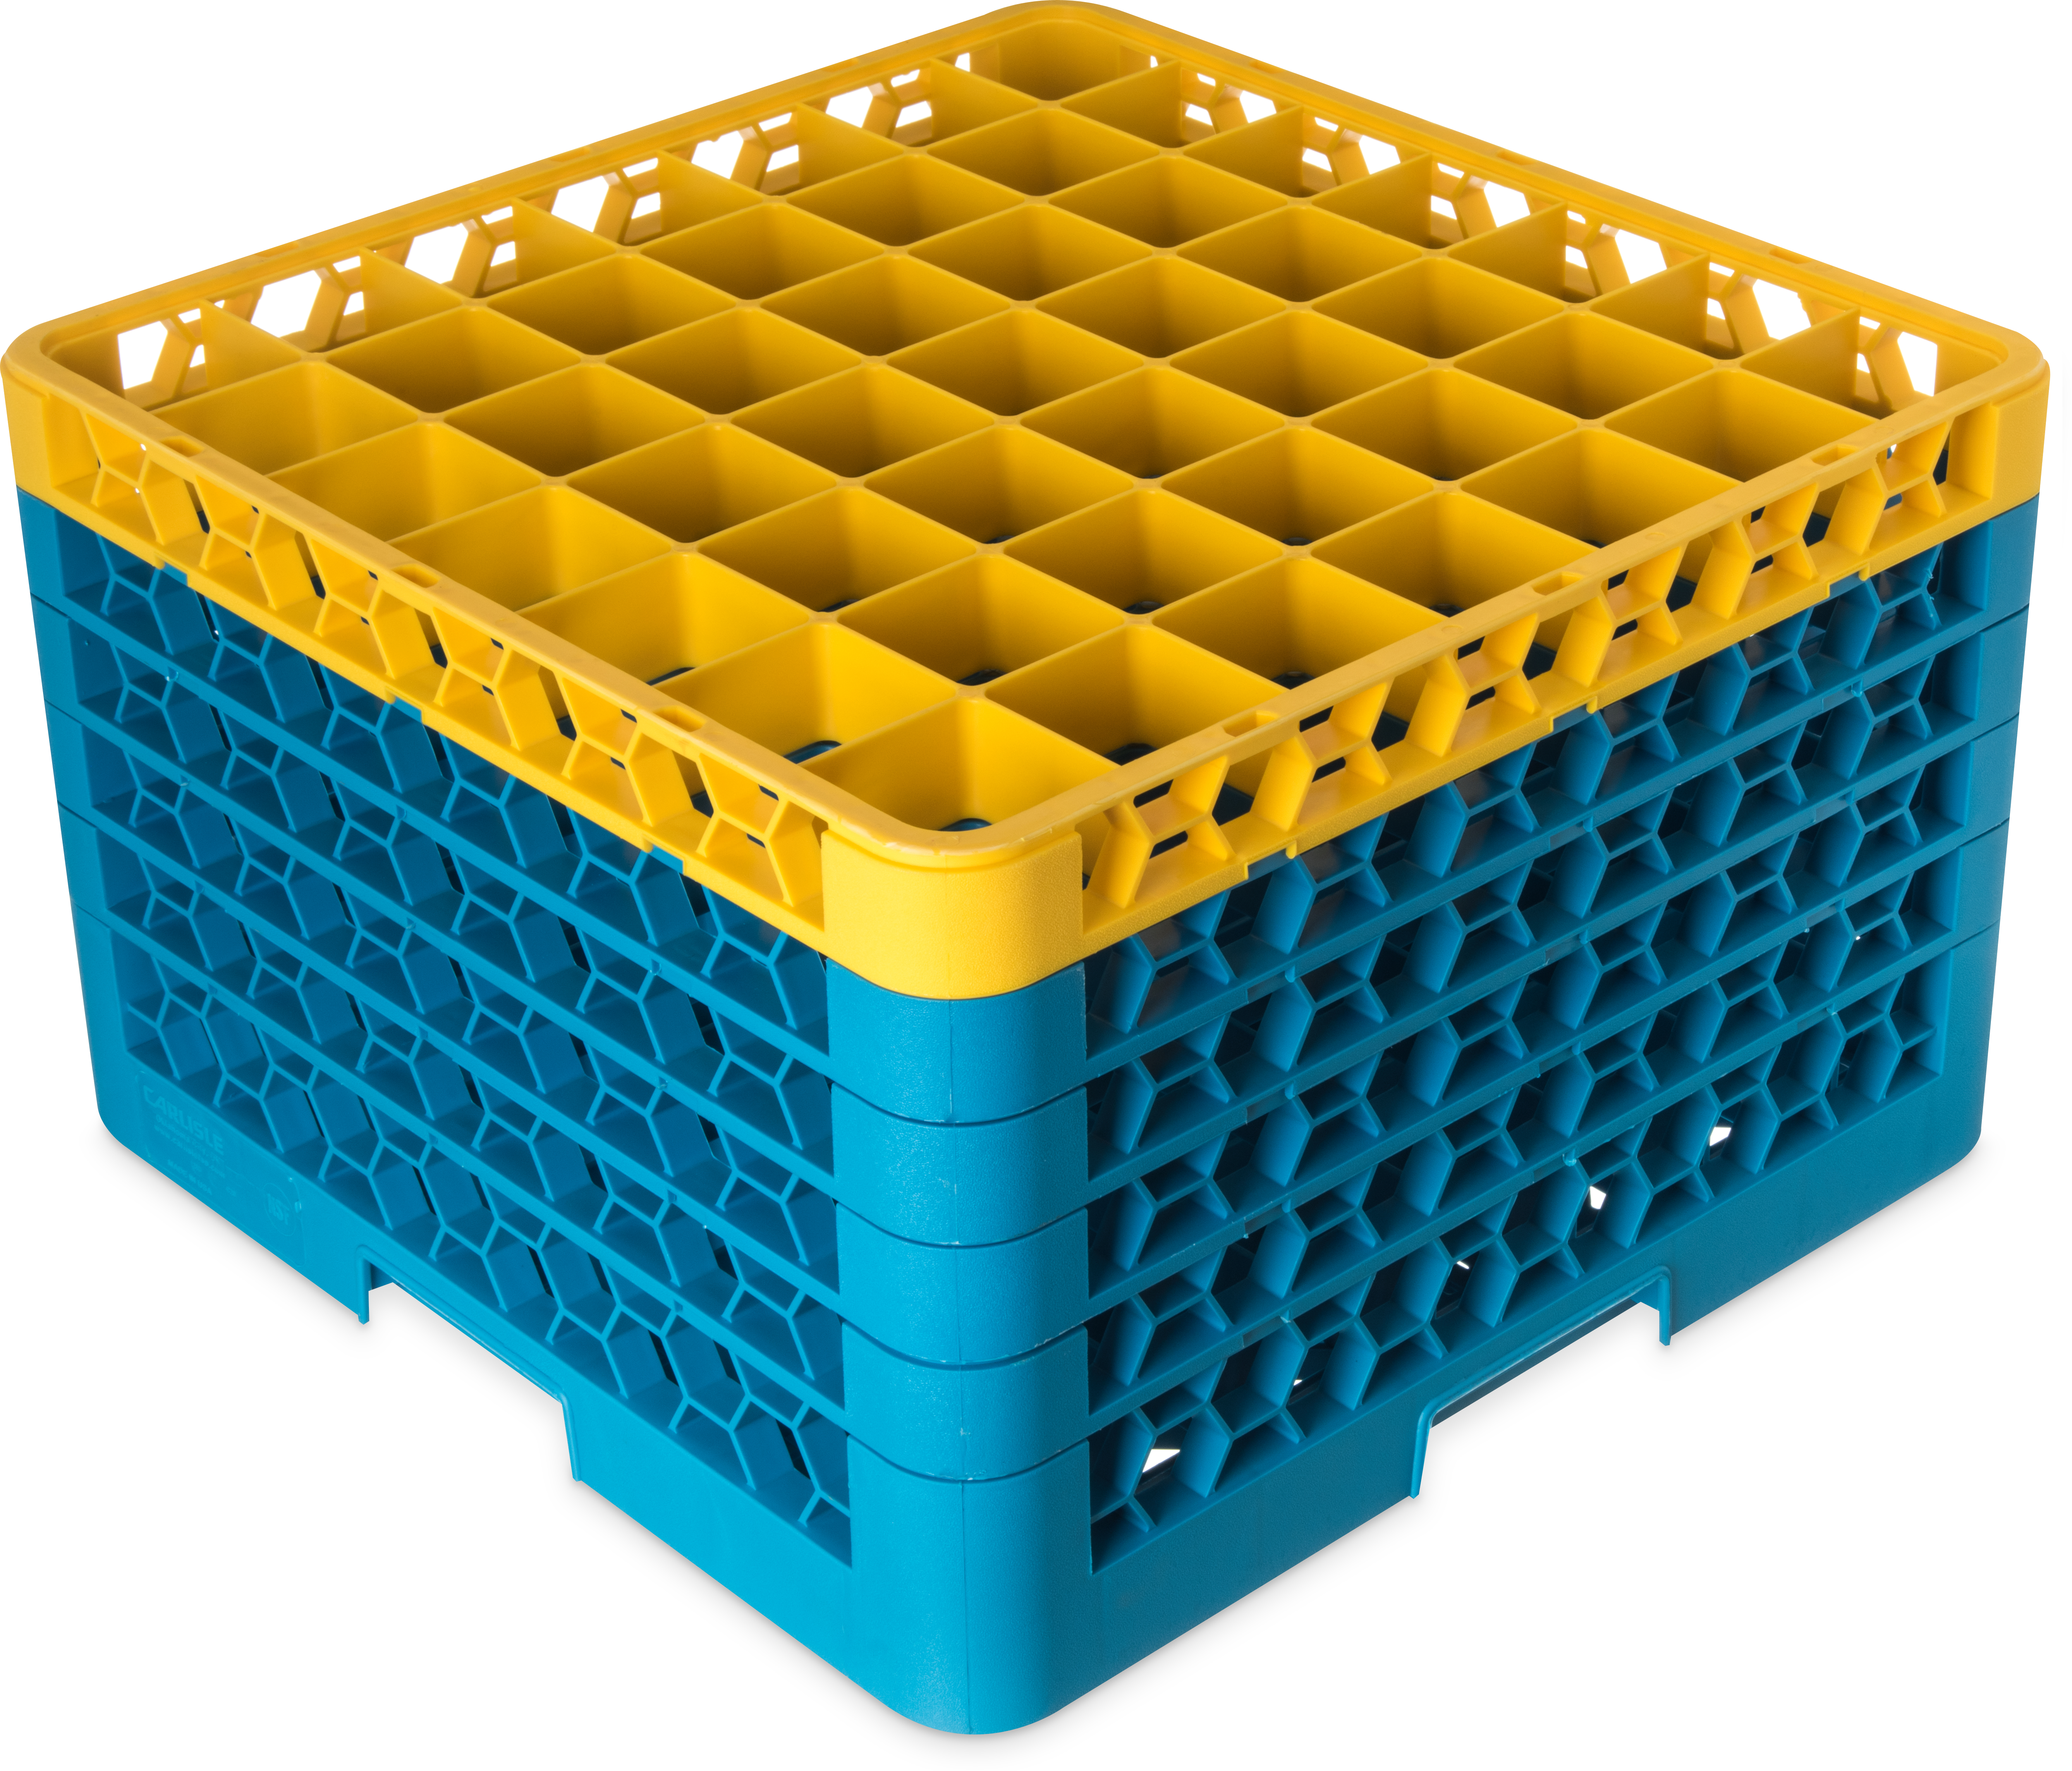 OptiClean 49 Compartment Glass Rack with 5 Extenders 11.9 - Yellow-Carlisle Blue